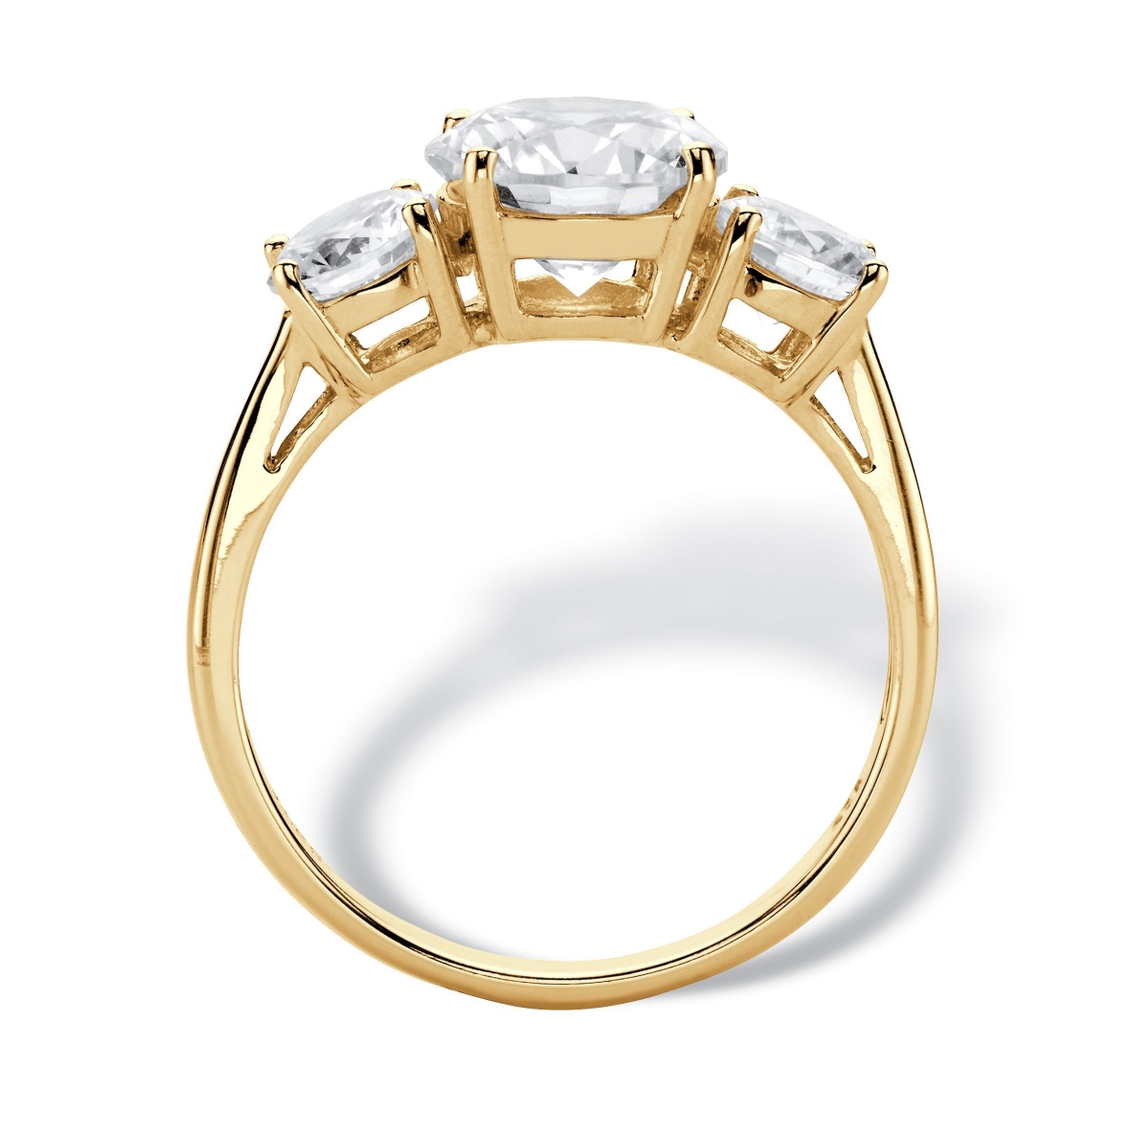 Round Cubic Zirconia 3-Stone Engagement Ring 3 TCW in Solid 10k Yellow Gold - Image 2 of 5